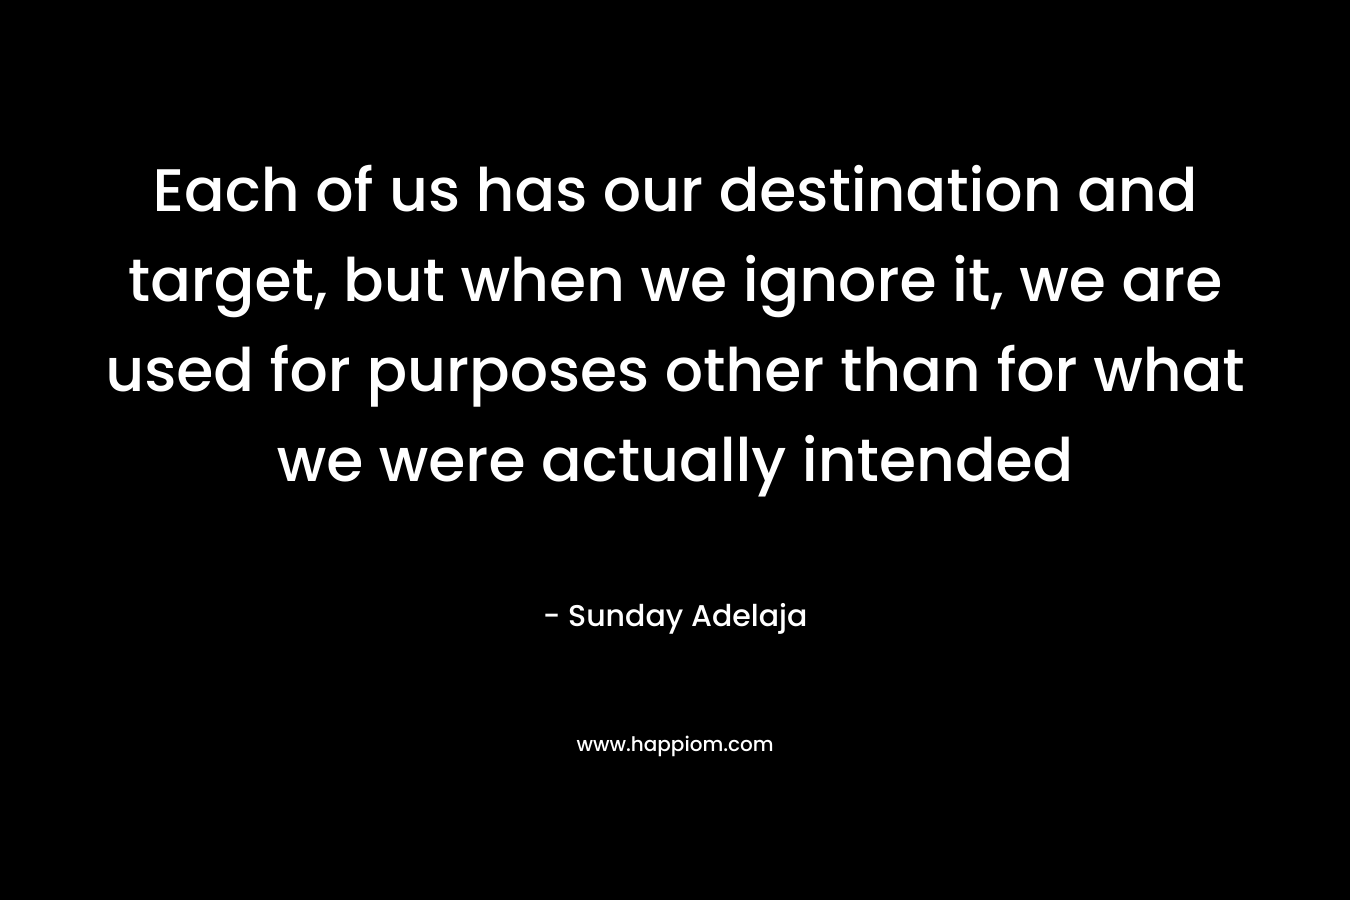 Each of us has our destination and target, but when we ignore it, we are used for purposes other than for what we were actually intended